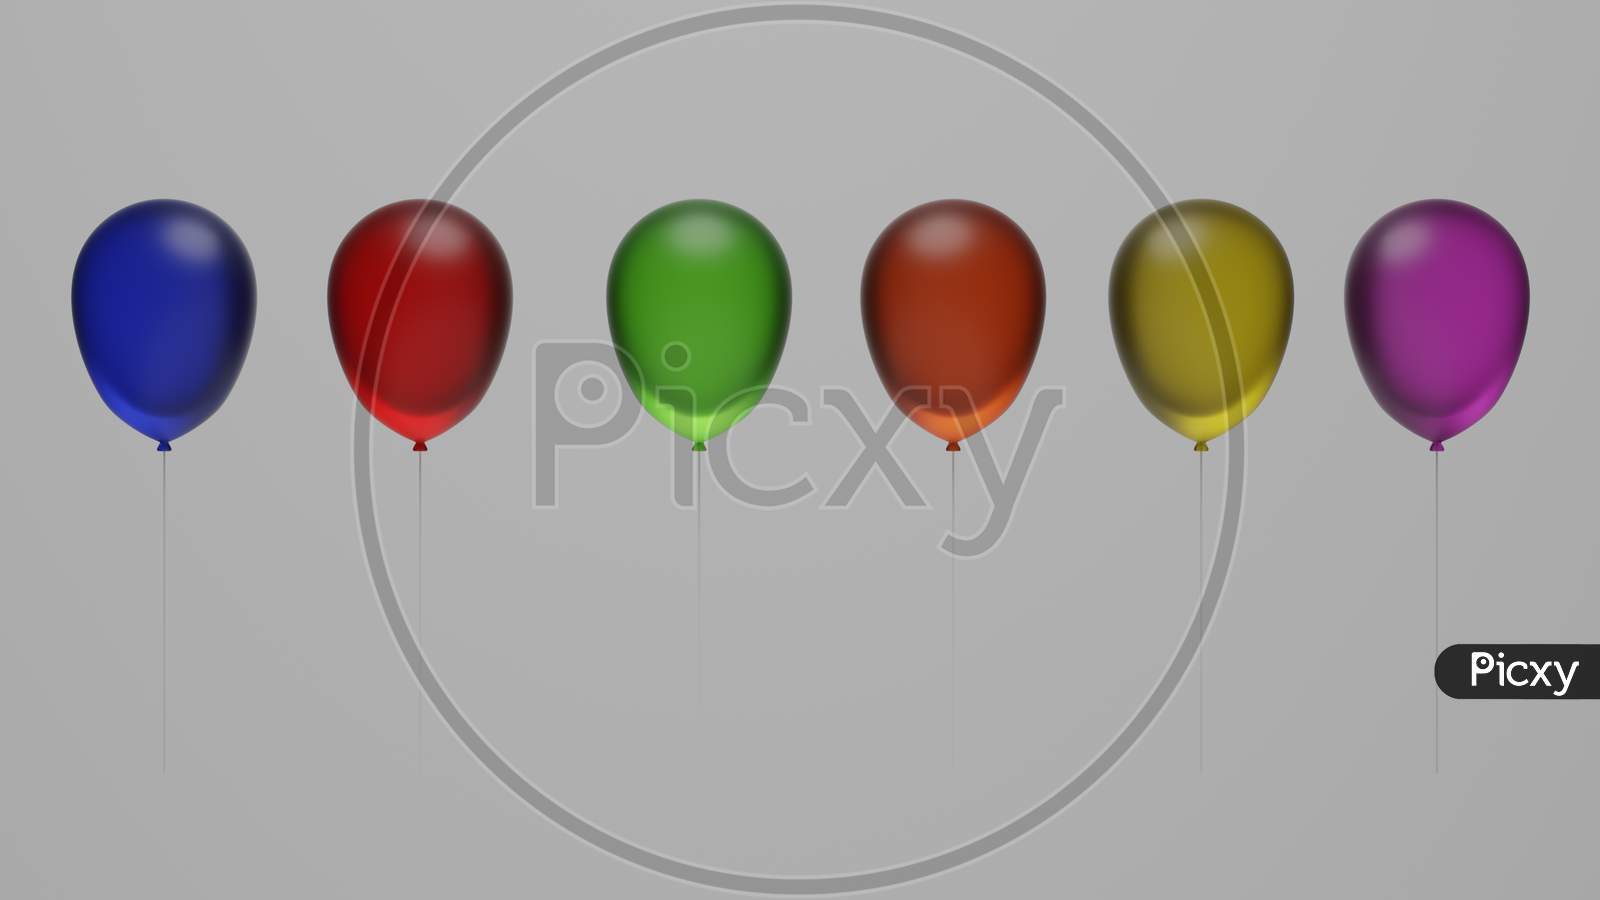 3D Rendering Of Colorful Balloons Against A White Background